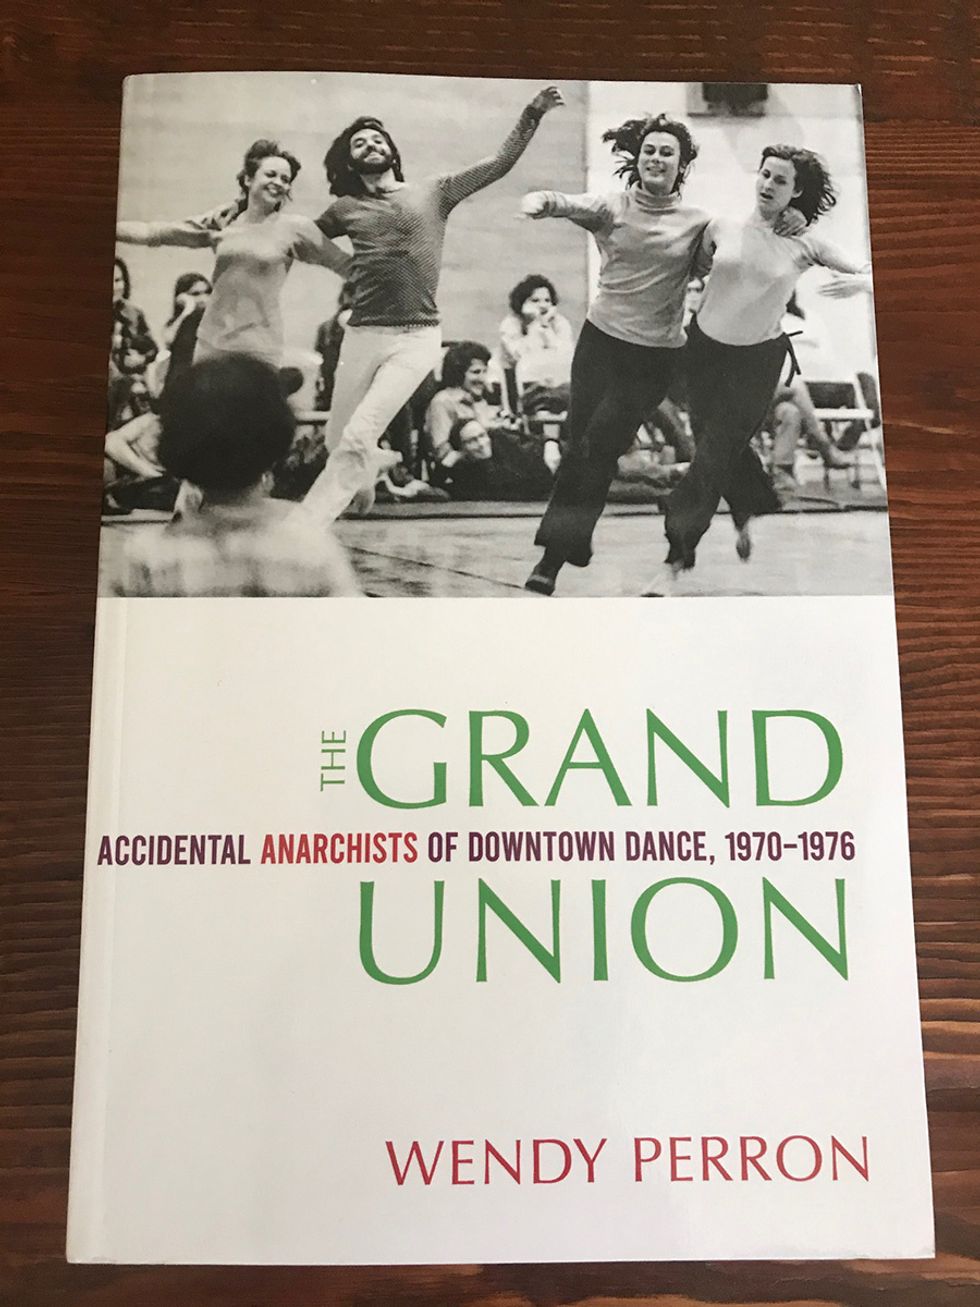 The cover image of Grand Union, featuring a black and white image of dancers at the top and green text on a white background